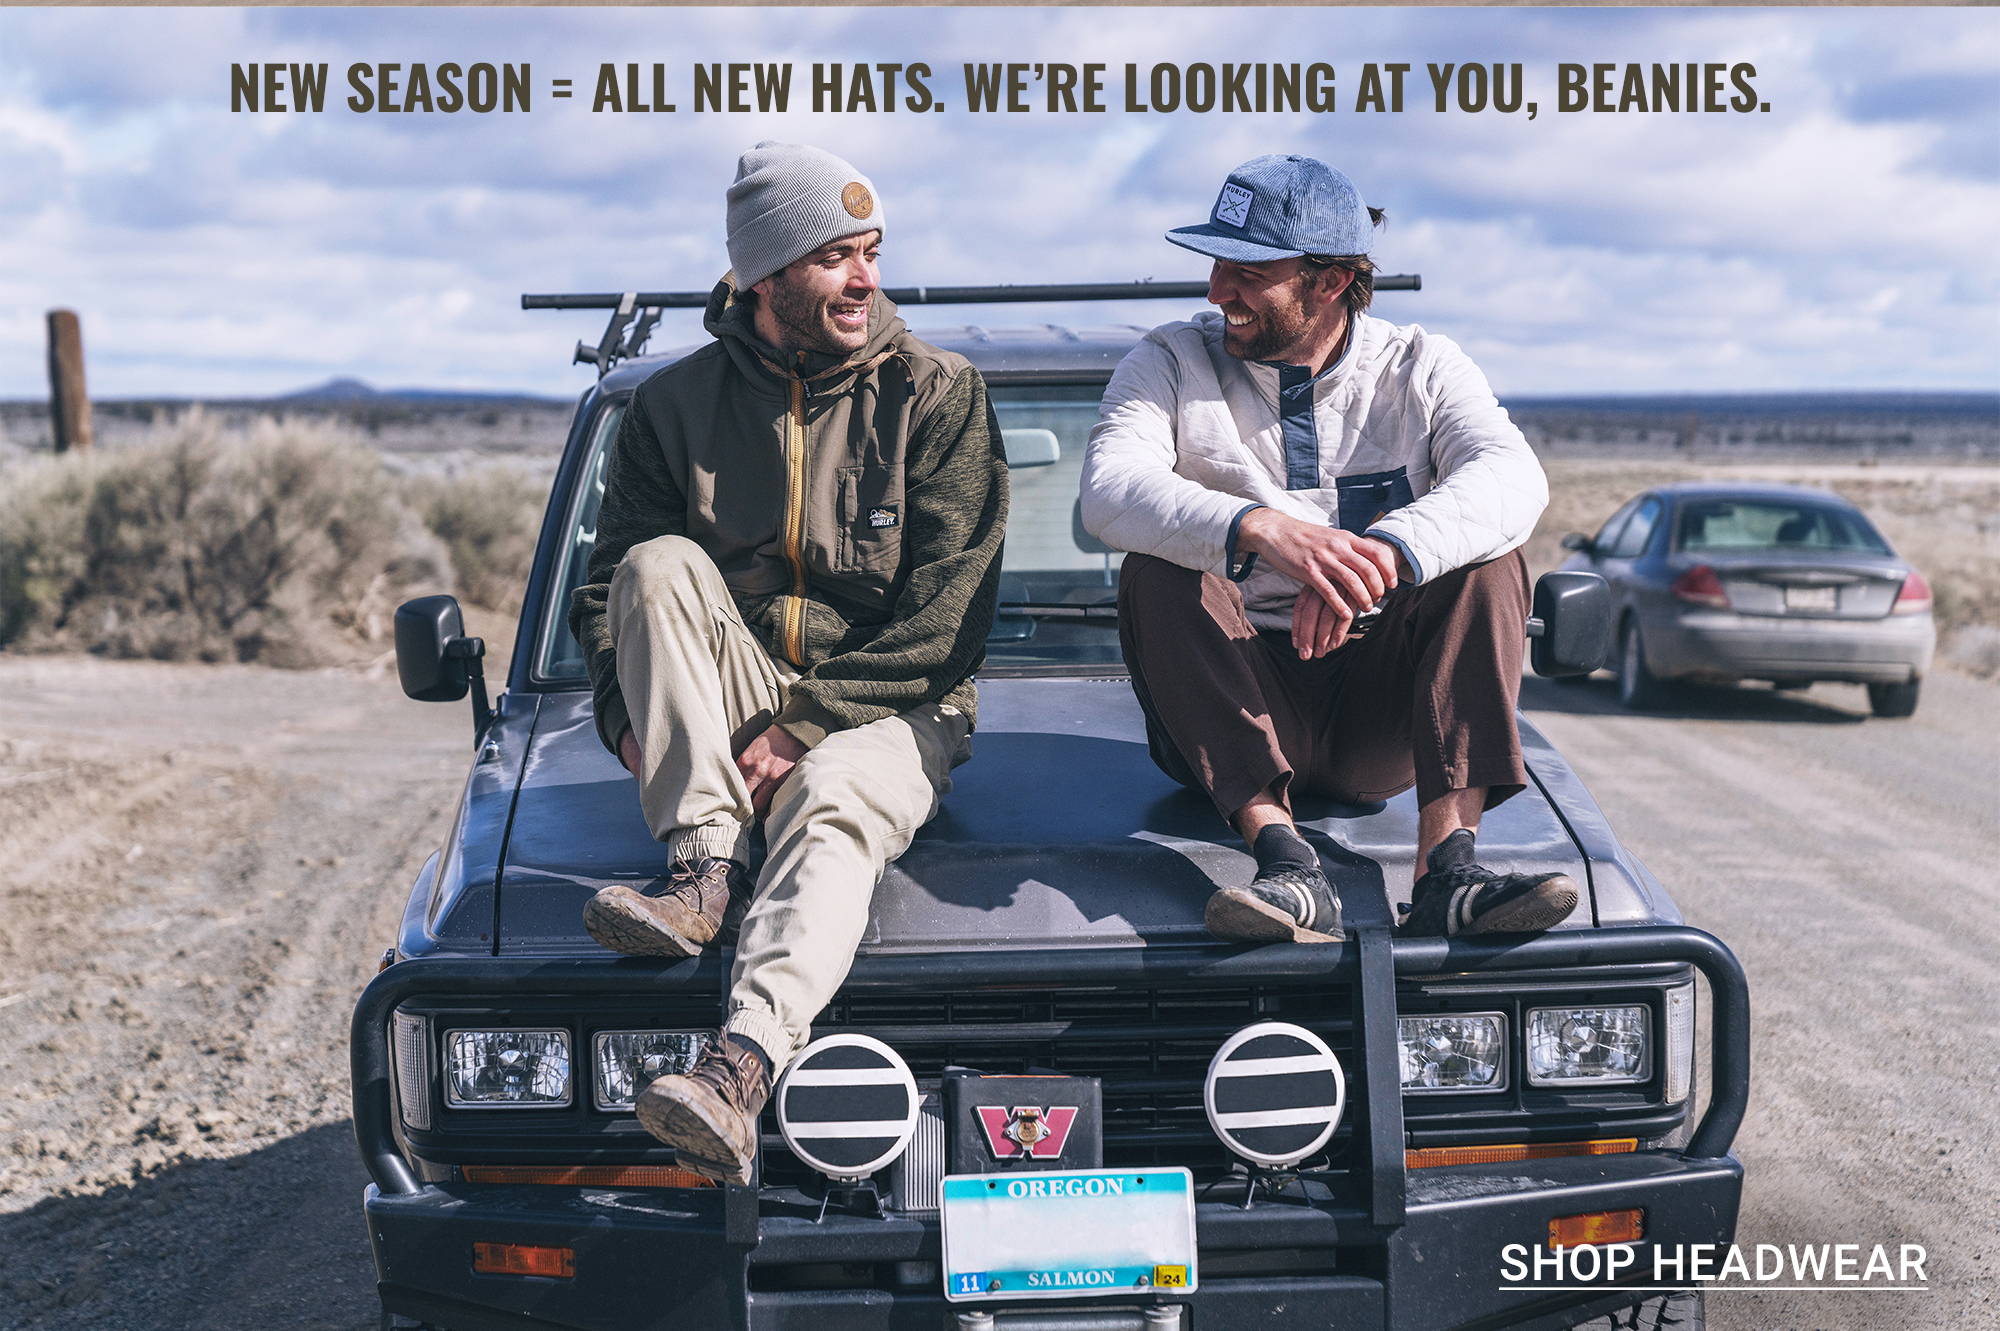 New season=all new hats. We’re looking at you, beanies. SHOP HEADWEAR 